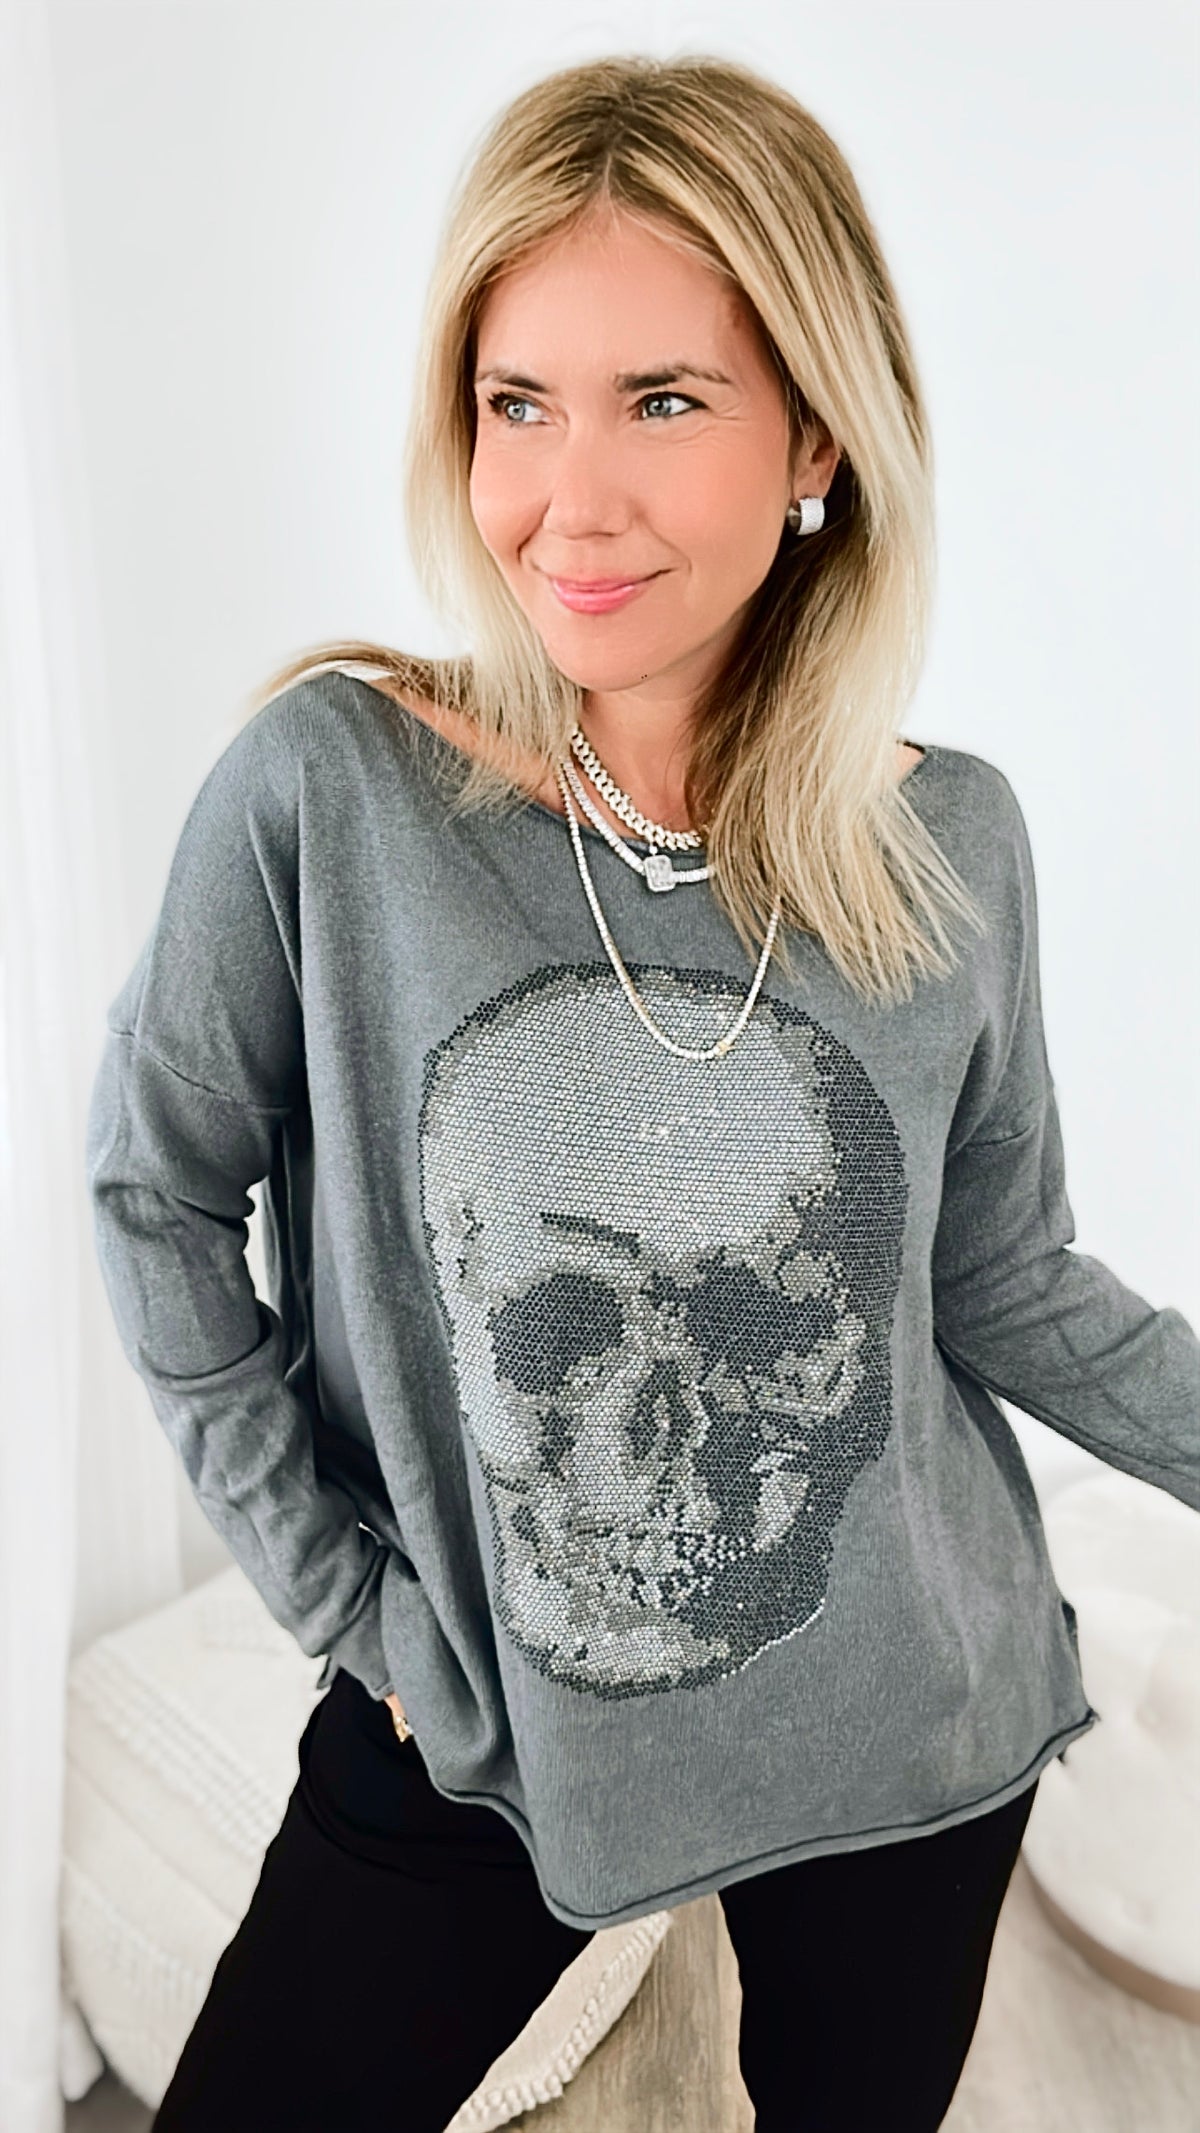 Italian Boatneck Skull Sweater Top - Charcoal Grey-140 Sweaters-Venti6-Coastal Bloom Boutique, find the trendiest versions of the popular styles and looks Located in Indialantic, FL